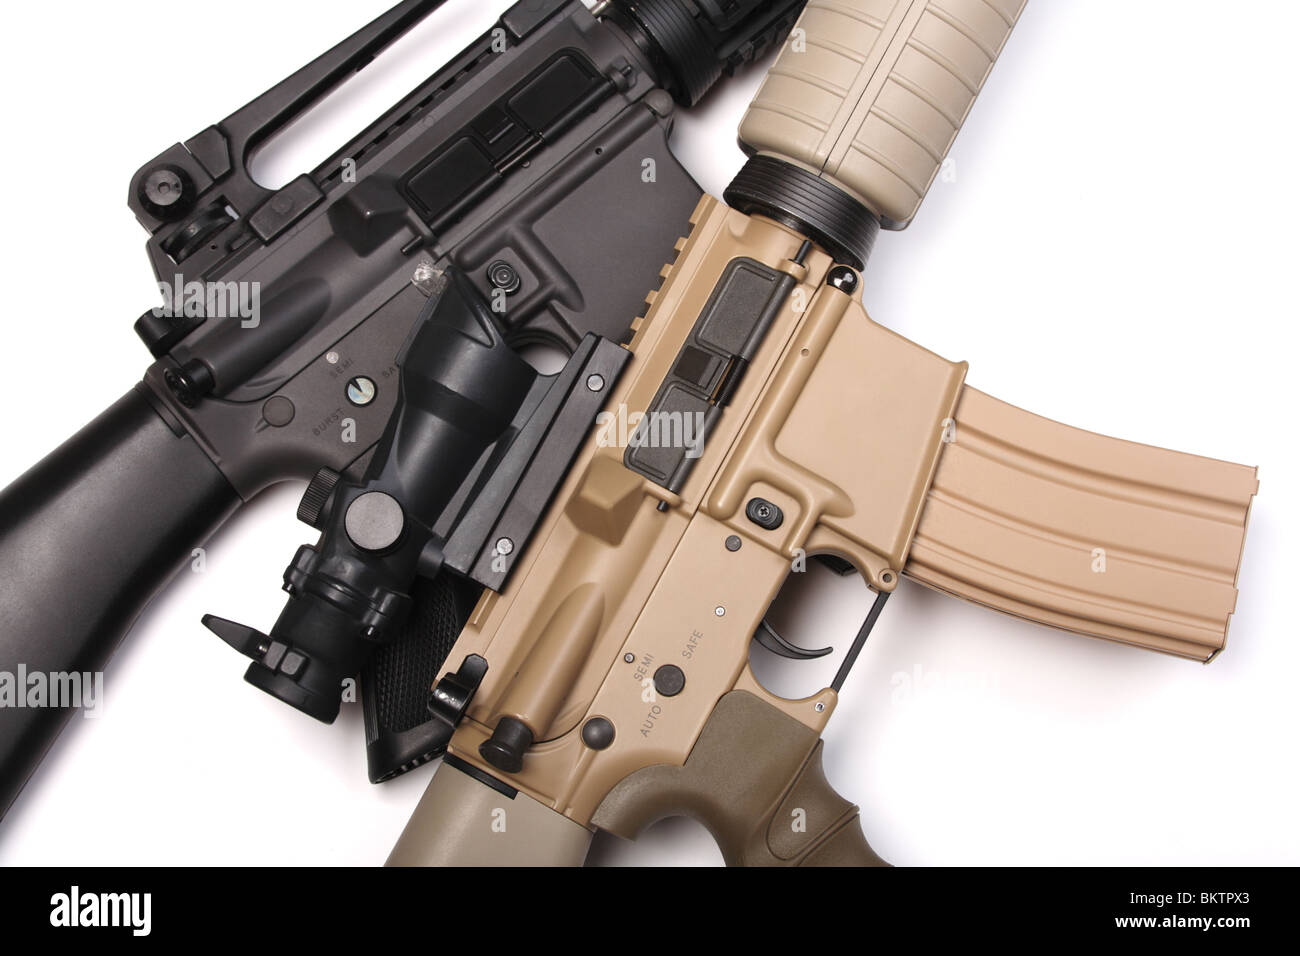 Two M16 assault rifles close-up isolated on white background. Studio shot. Stock Photo